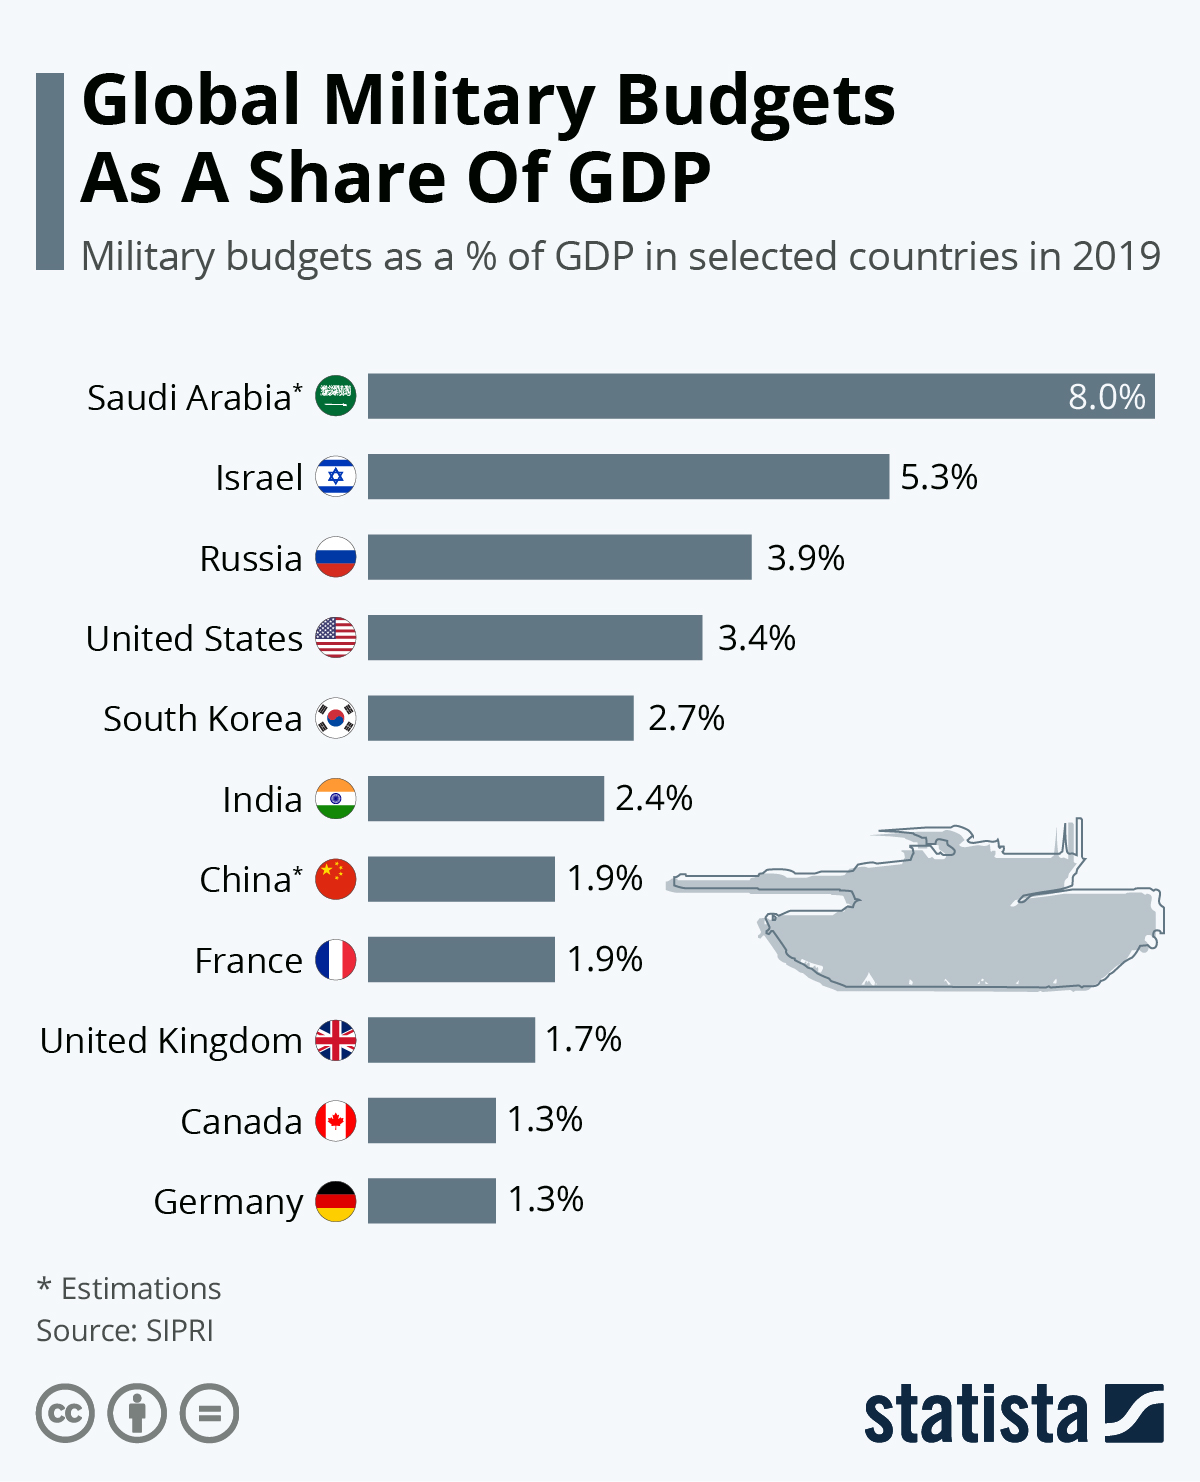 The Biggest Military Budgets As A Share Of GDP